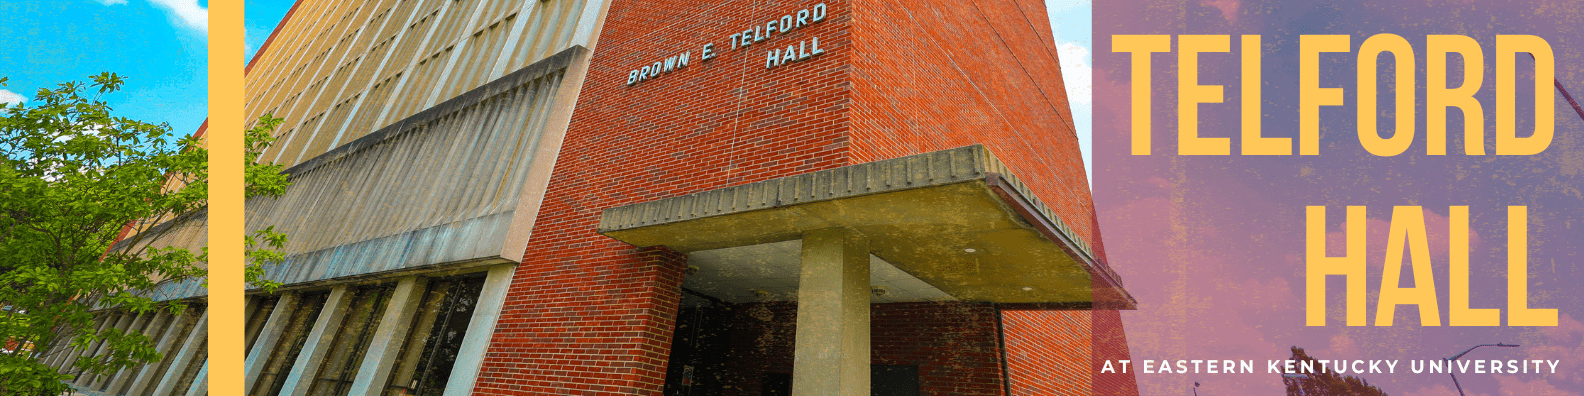 An image of Telford Hall at EKU, with the text "Telford Hall".